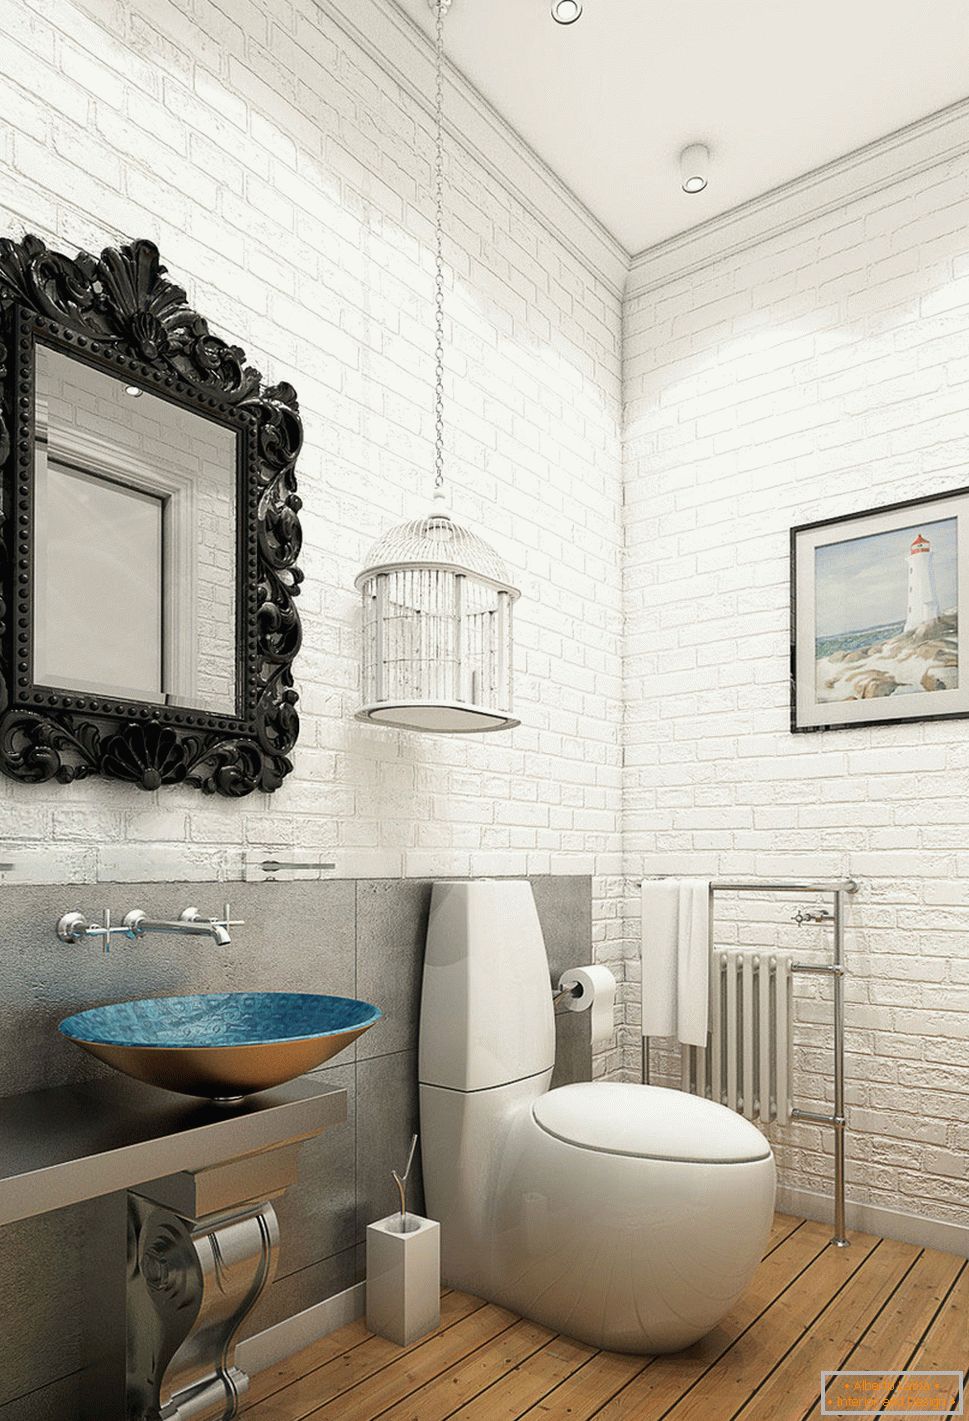 Interior of a small bathroom with a toilet